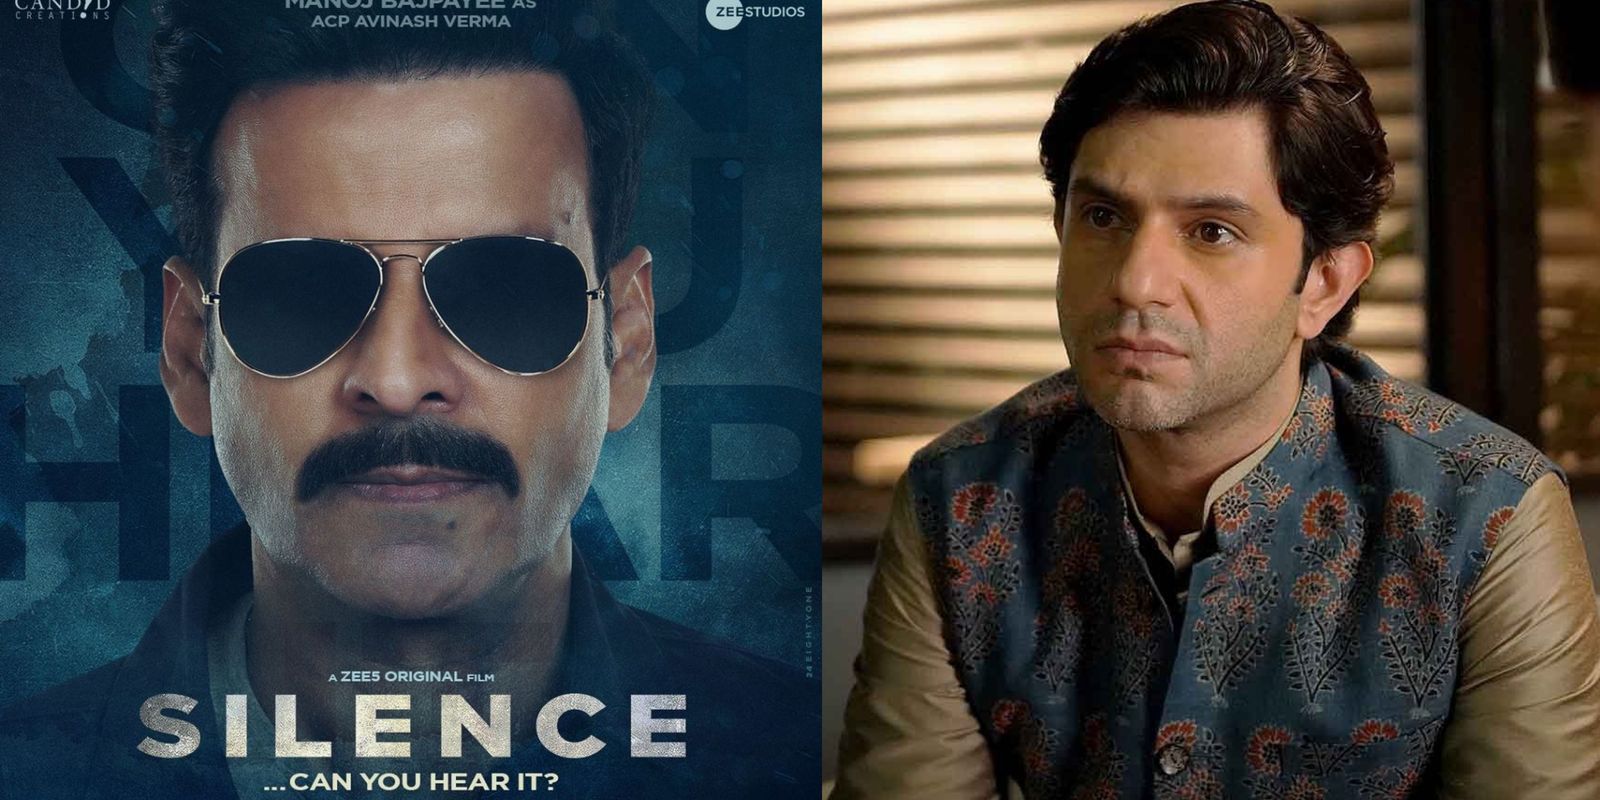 Emmy Award Nominee Arjun Mathur Gets Candid About Working With Manoj Bajpayee In ‘Silence...Can You Hear It?’